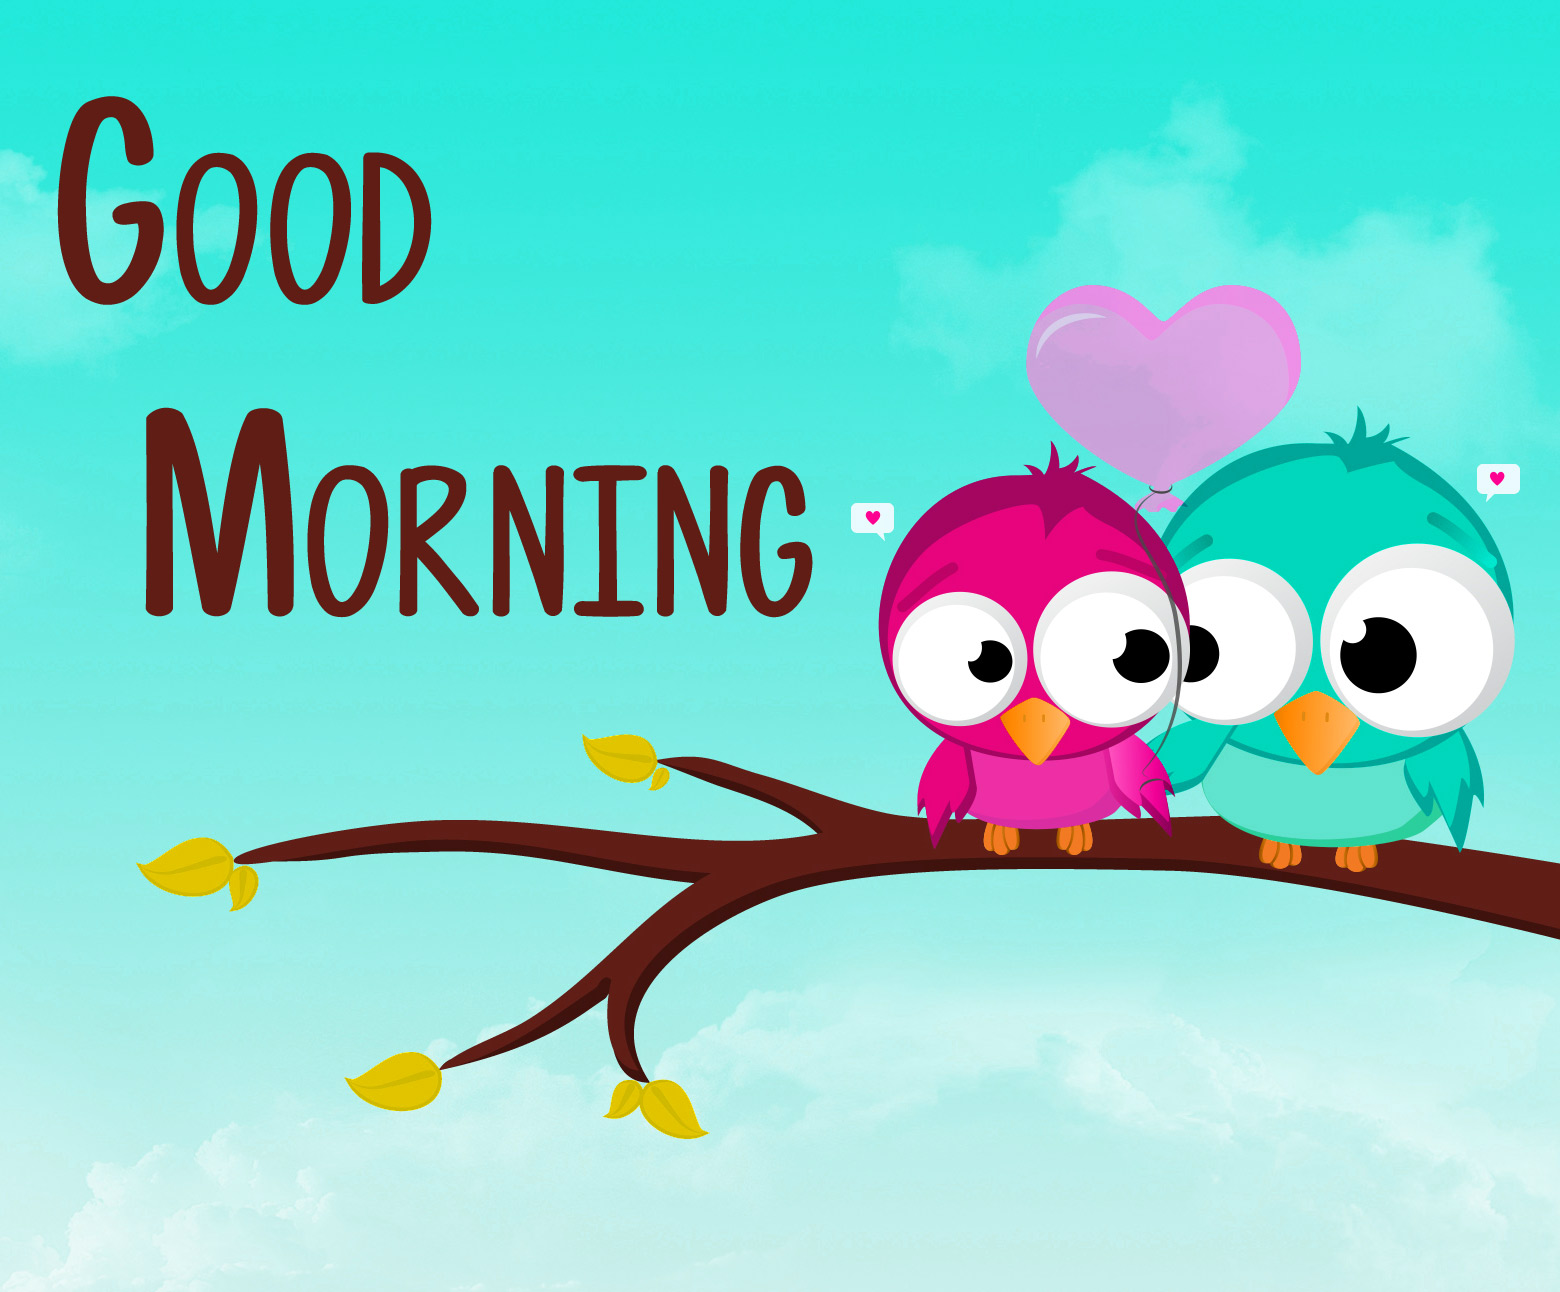 Love Good Morning Wishes Pics Images Download 